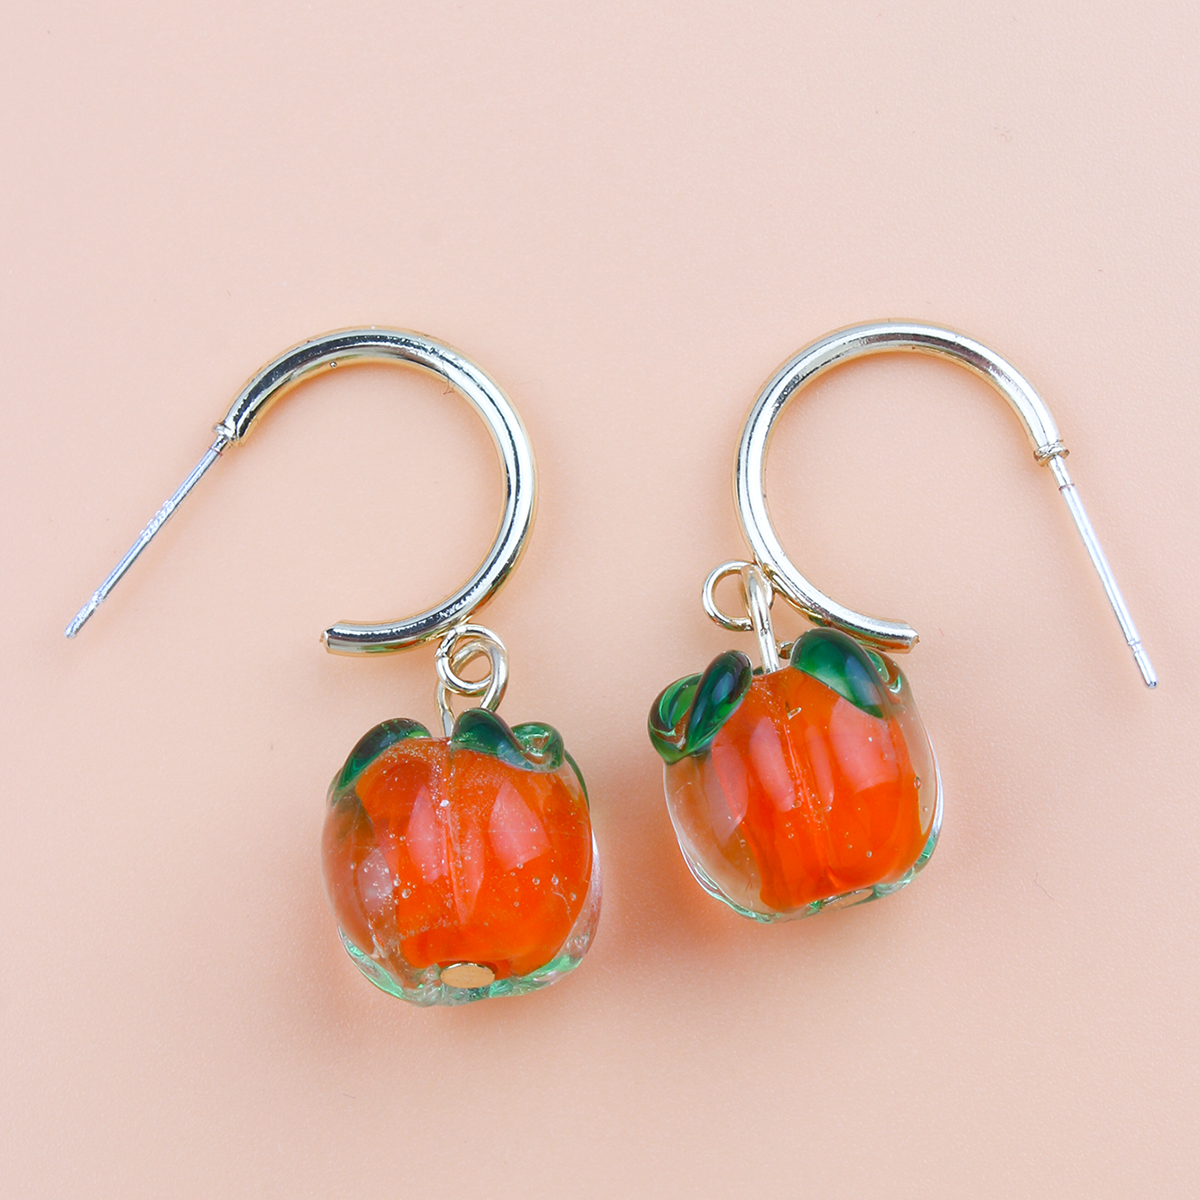 New Year Persimmon Ruyi Retro Simple Oil Glass Small Hoop Earringspicture1